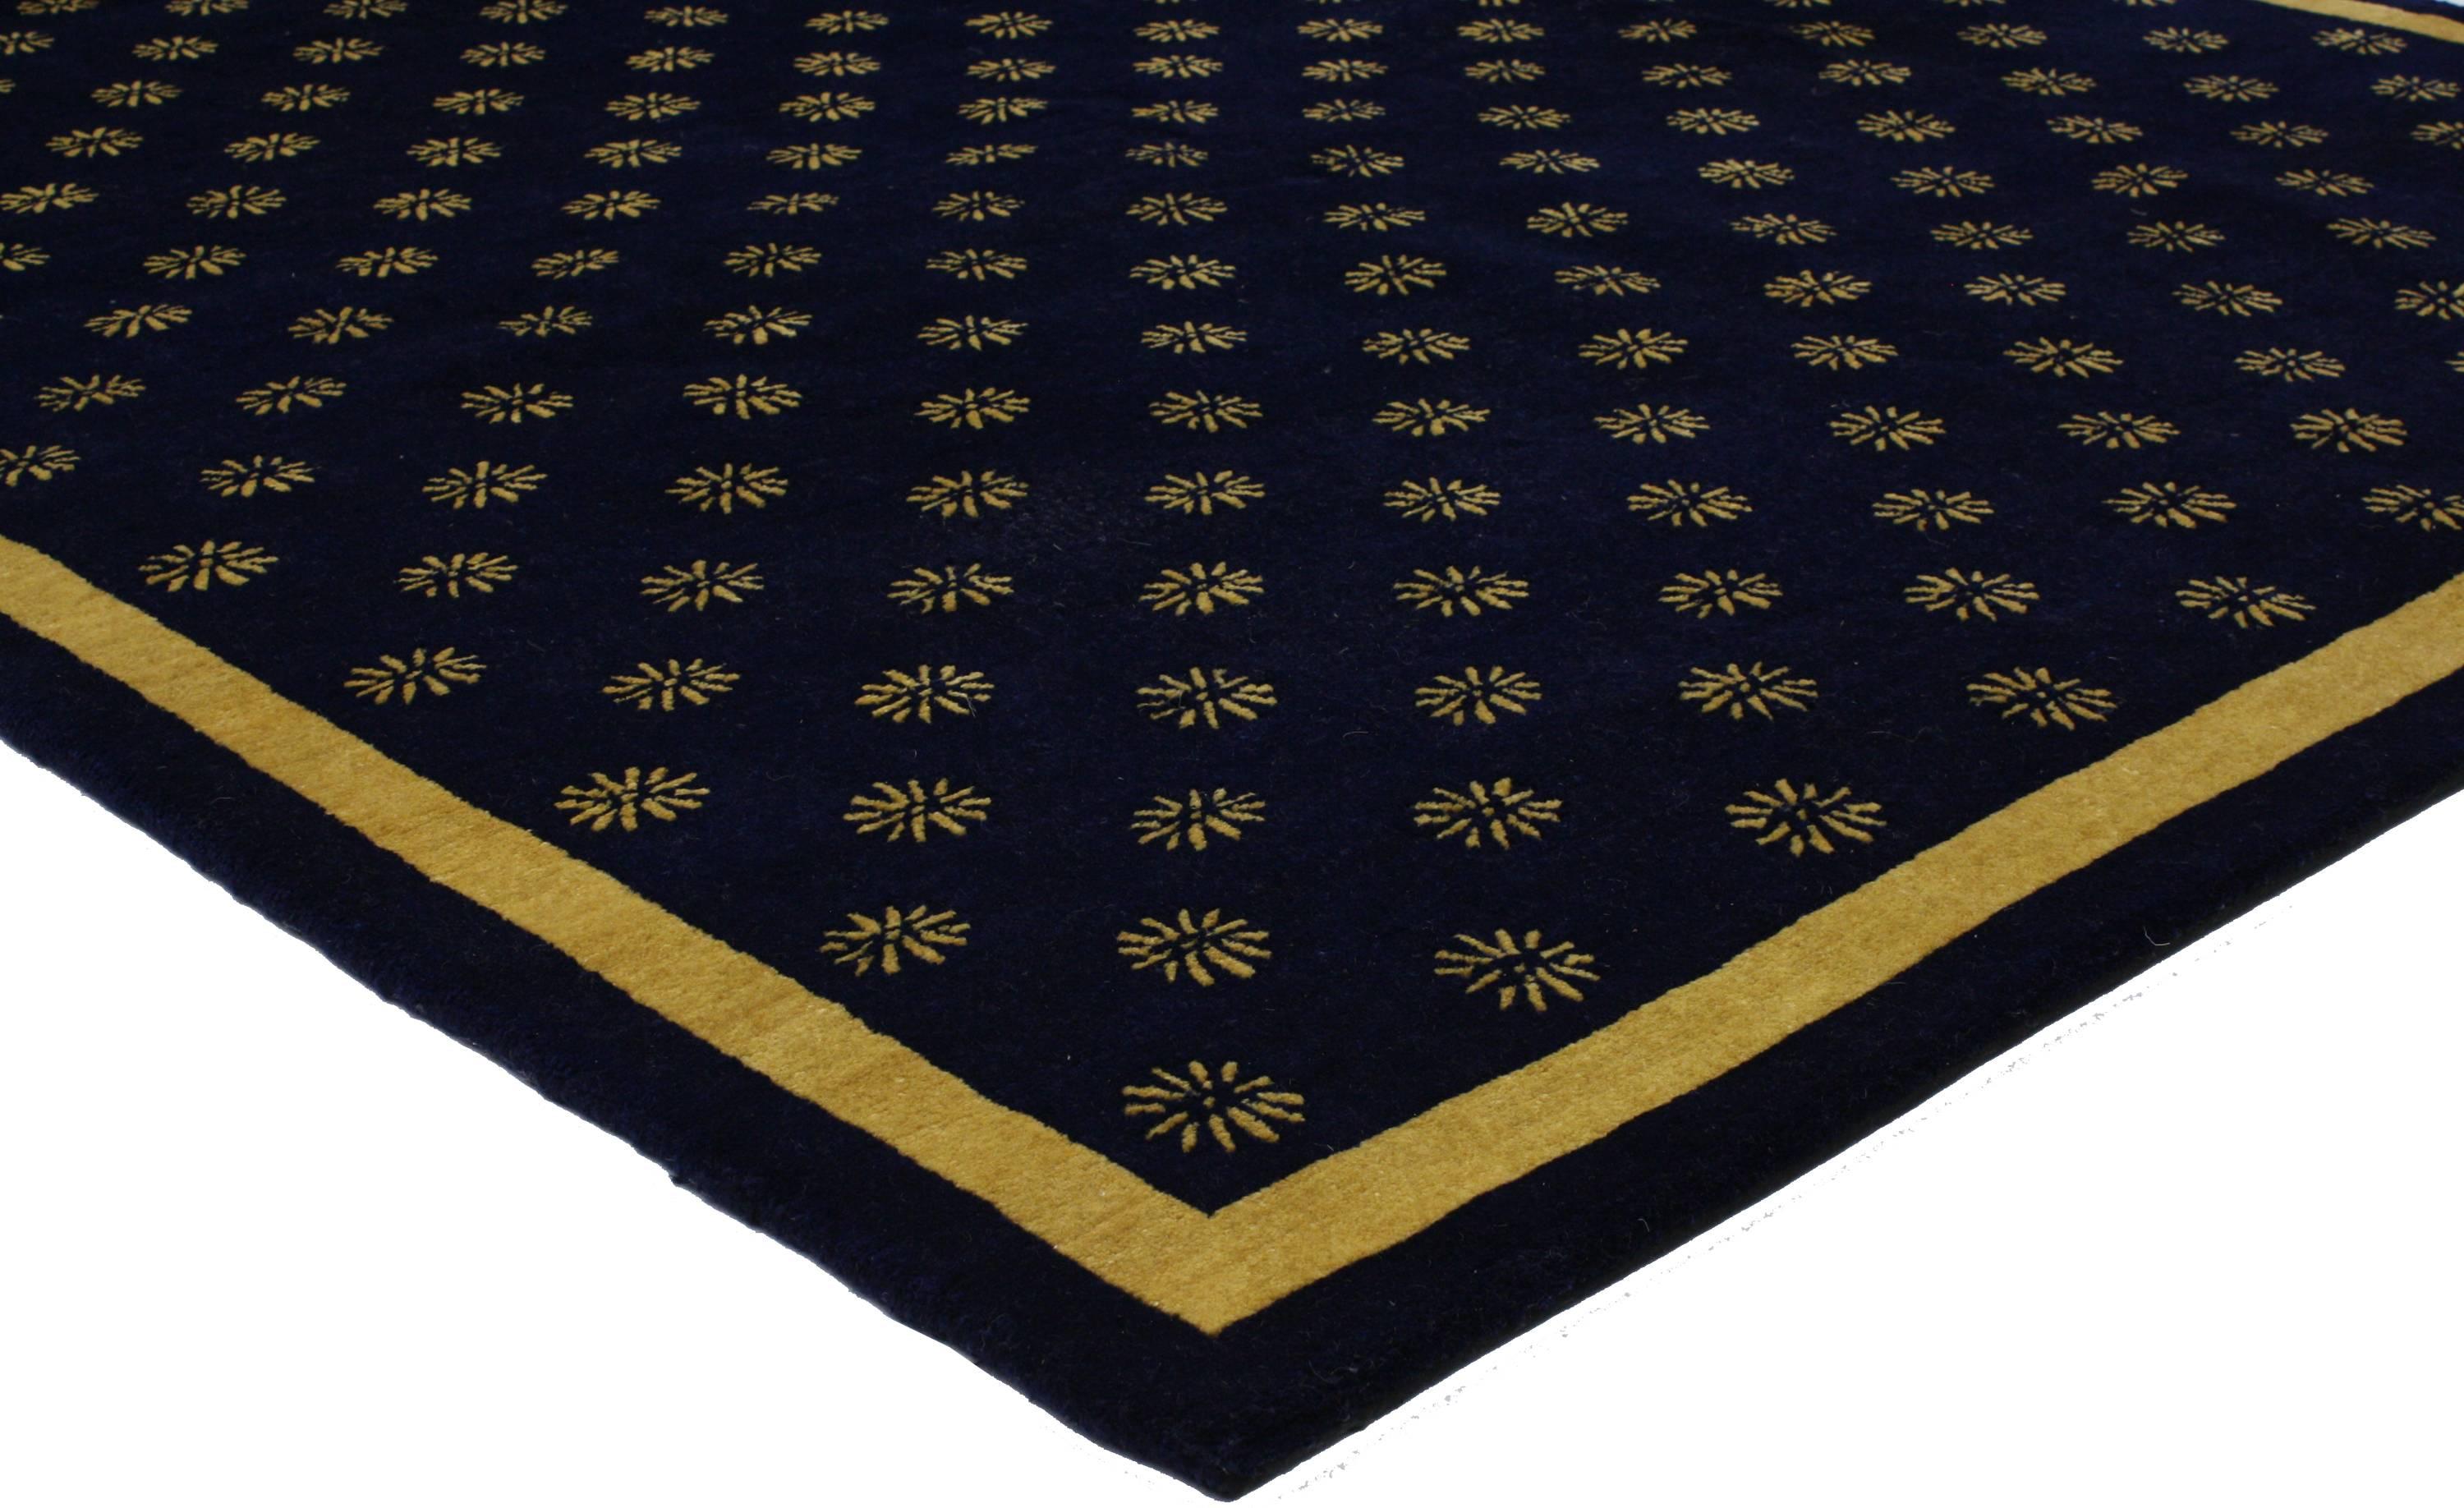 This navy blue and gold area rug features a Hollywood Regency style. Highlighting an all-over pattern of gold motifs on a navy blue background, this transitional rug exudes sophistication with a hint of swagger and a twist of neoclassical glamour.